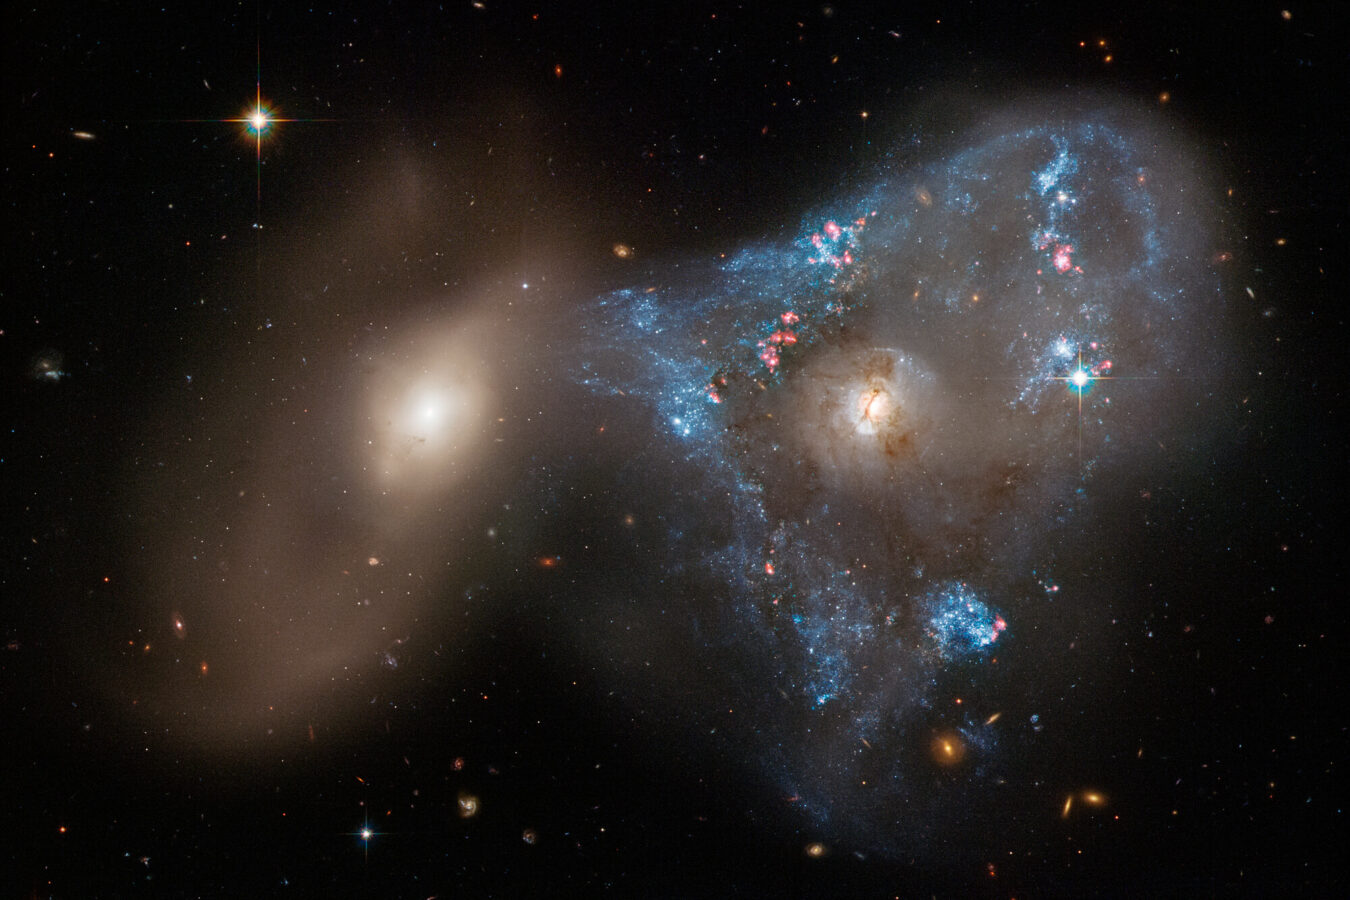 Galaxy Collision Creates 'Space Triangle' in New Hubble Image.